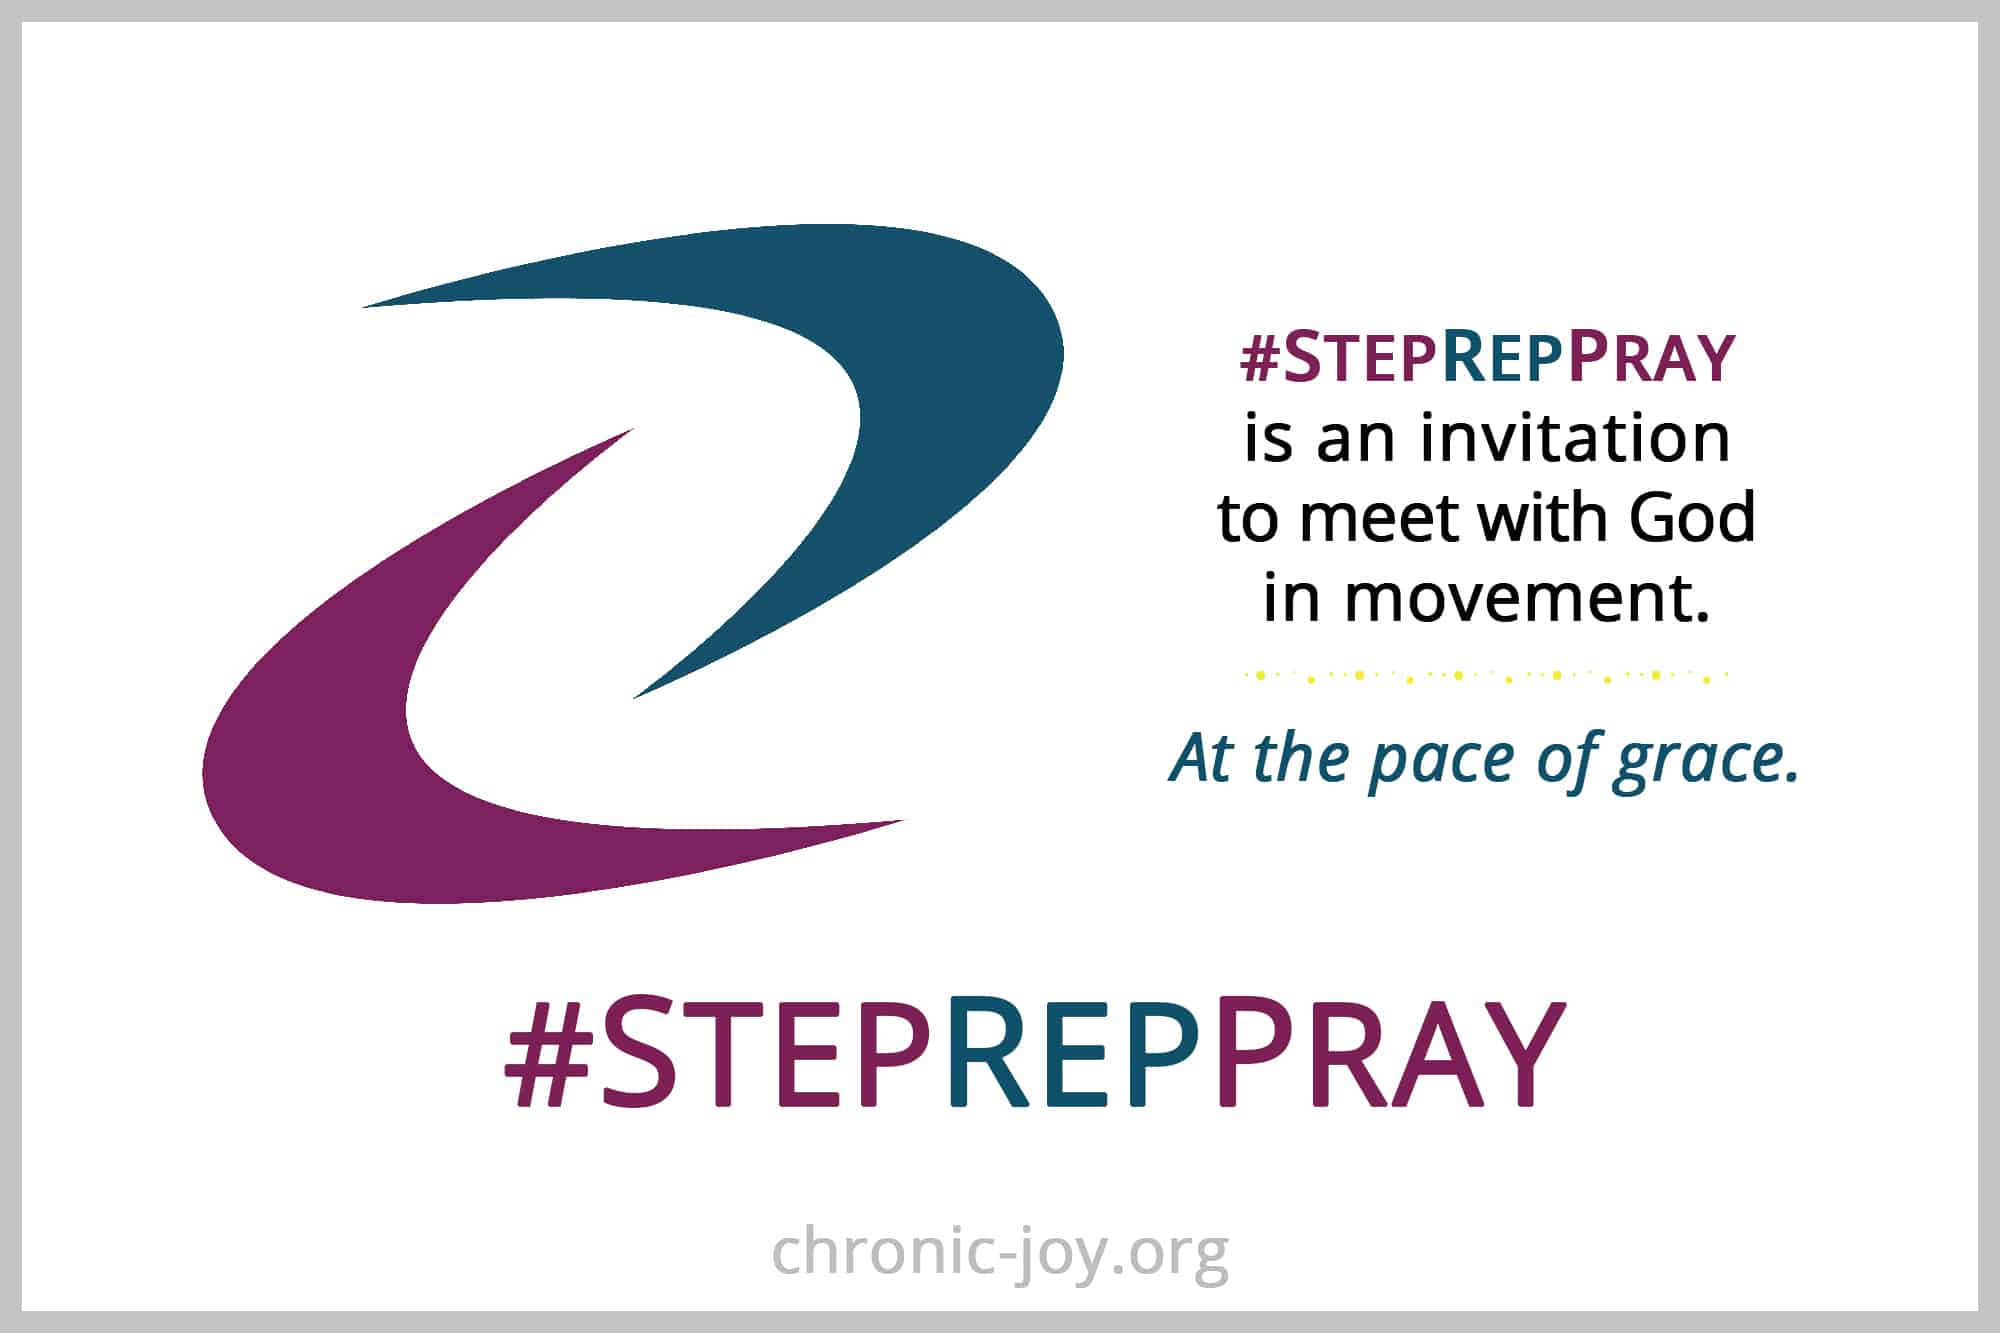 #StepRepPray is an invitation to meet with God in movement.